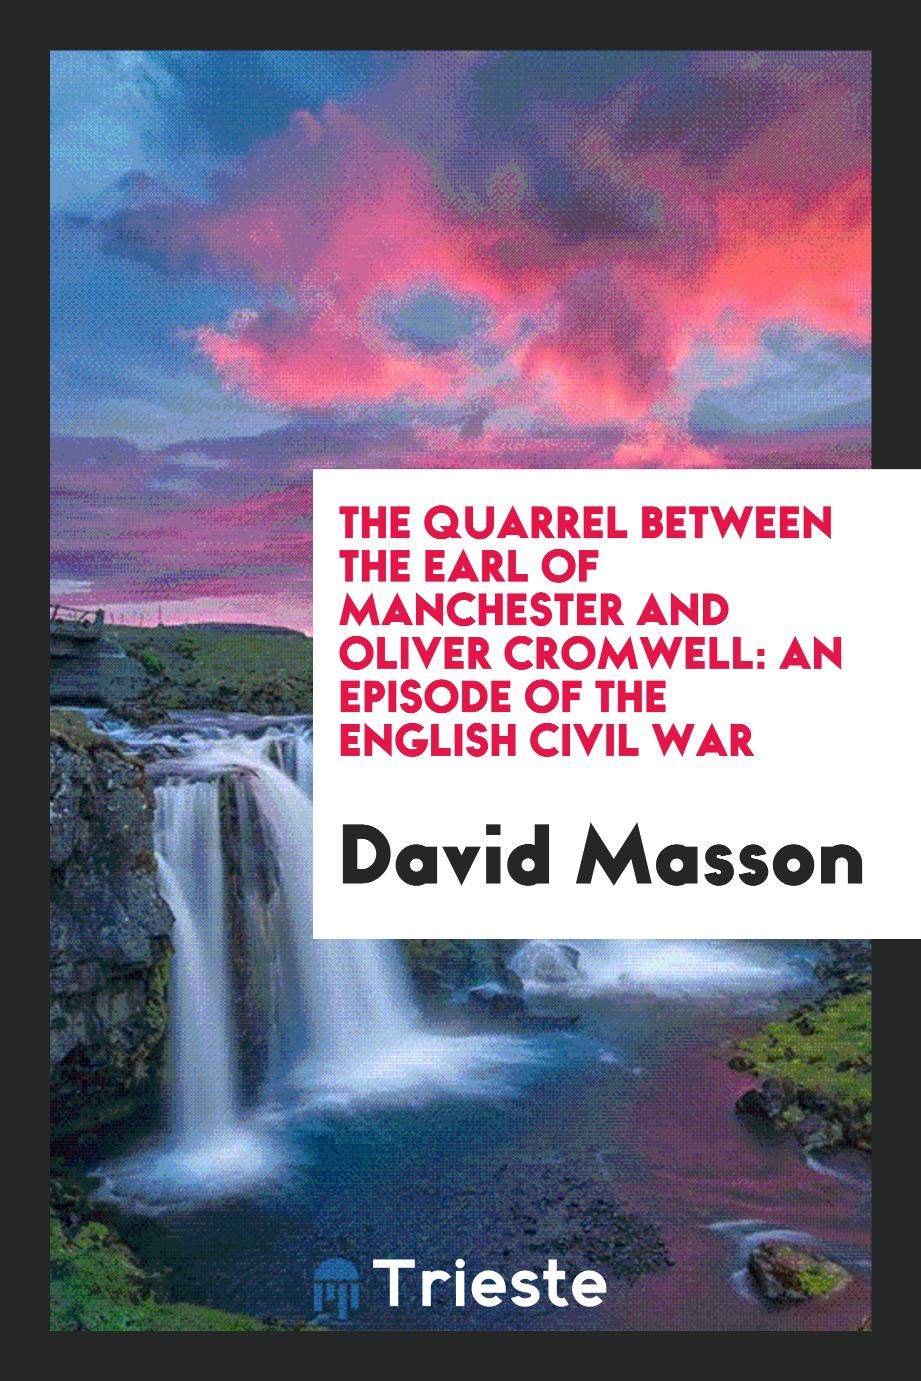 The Quarrel Between The Earl of Manchester and Oliver Cromwell: an Episode of the English Civil War